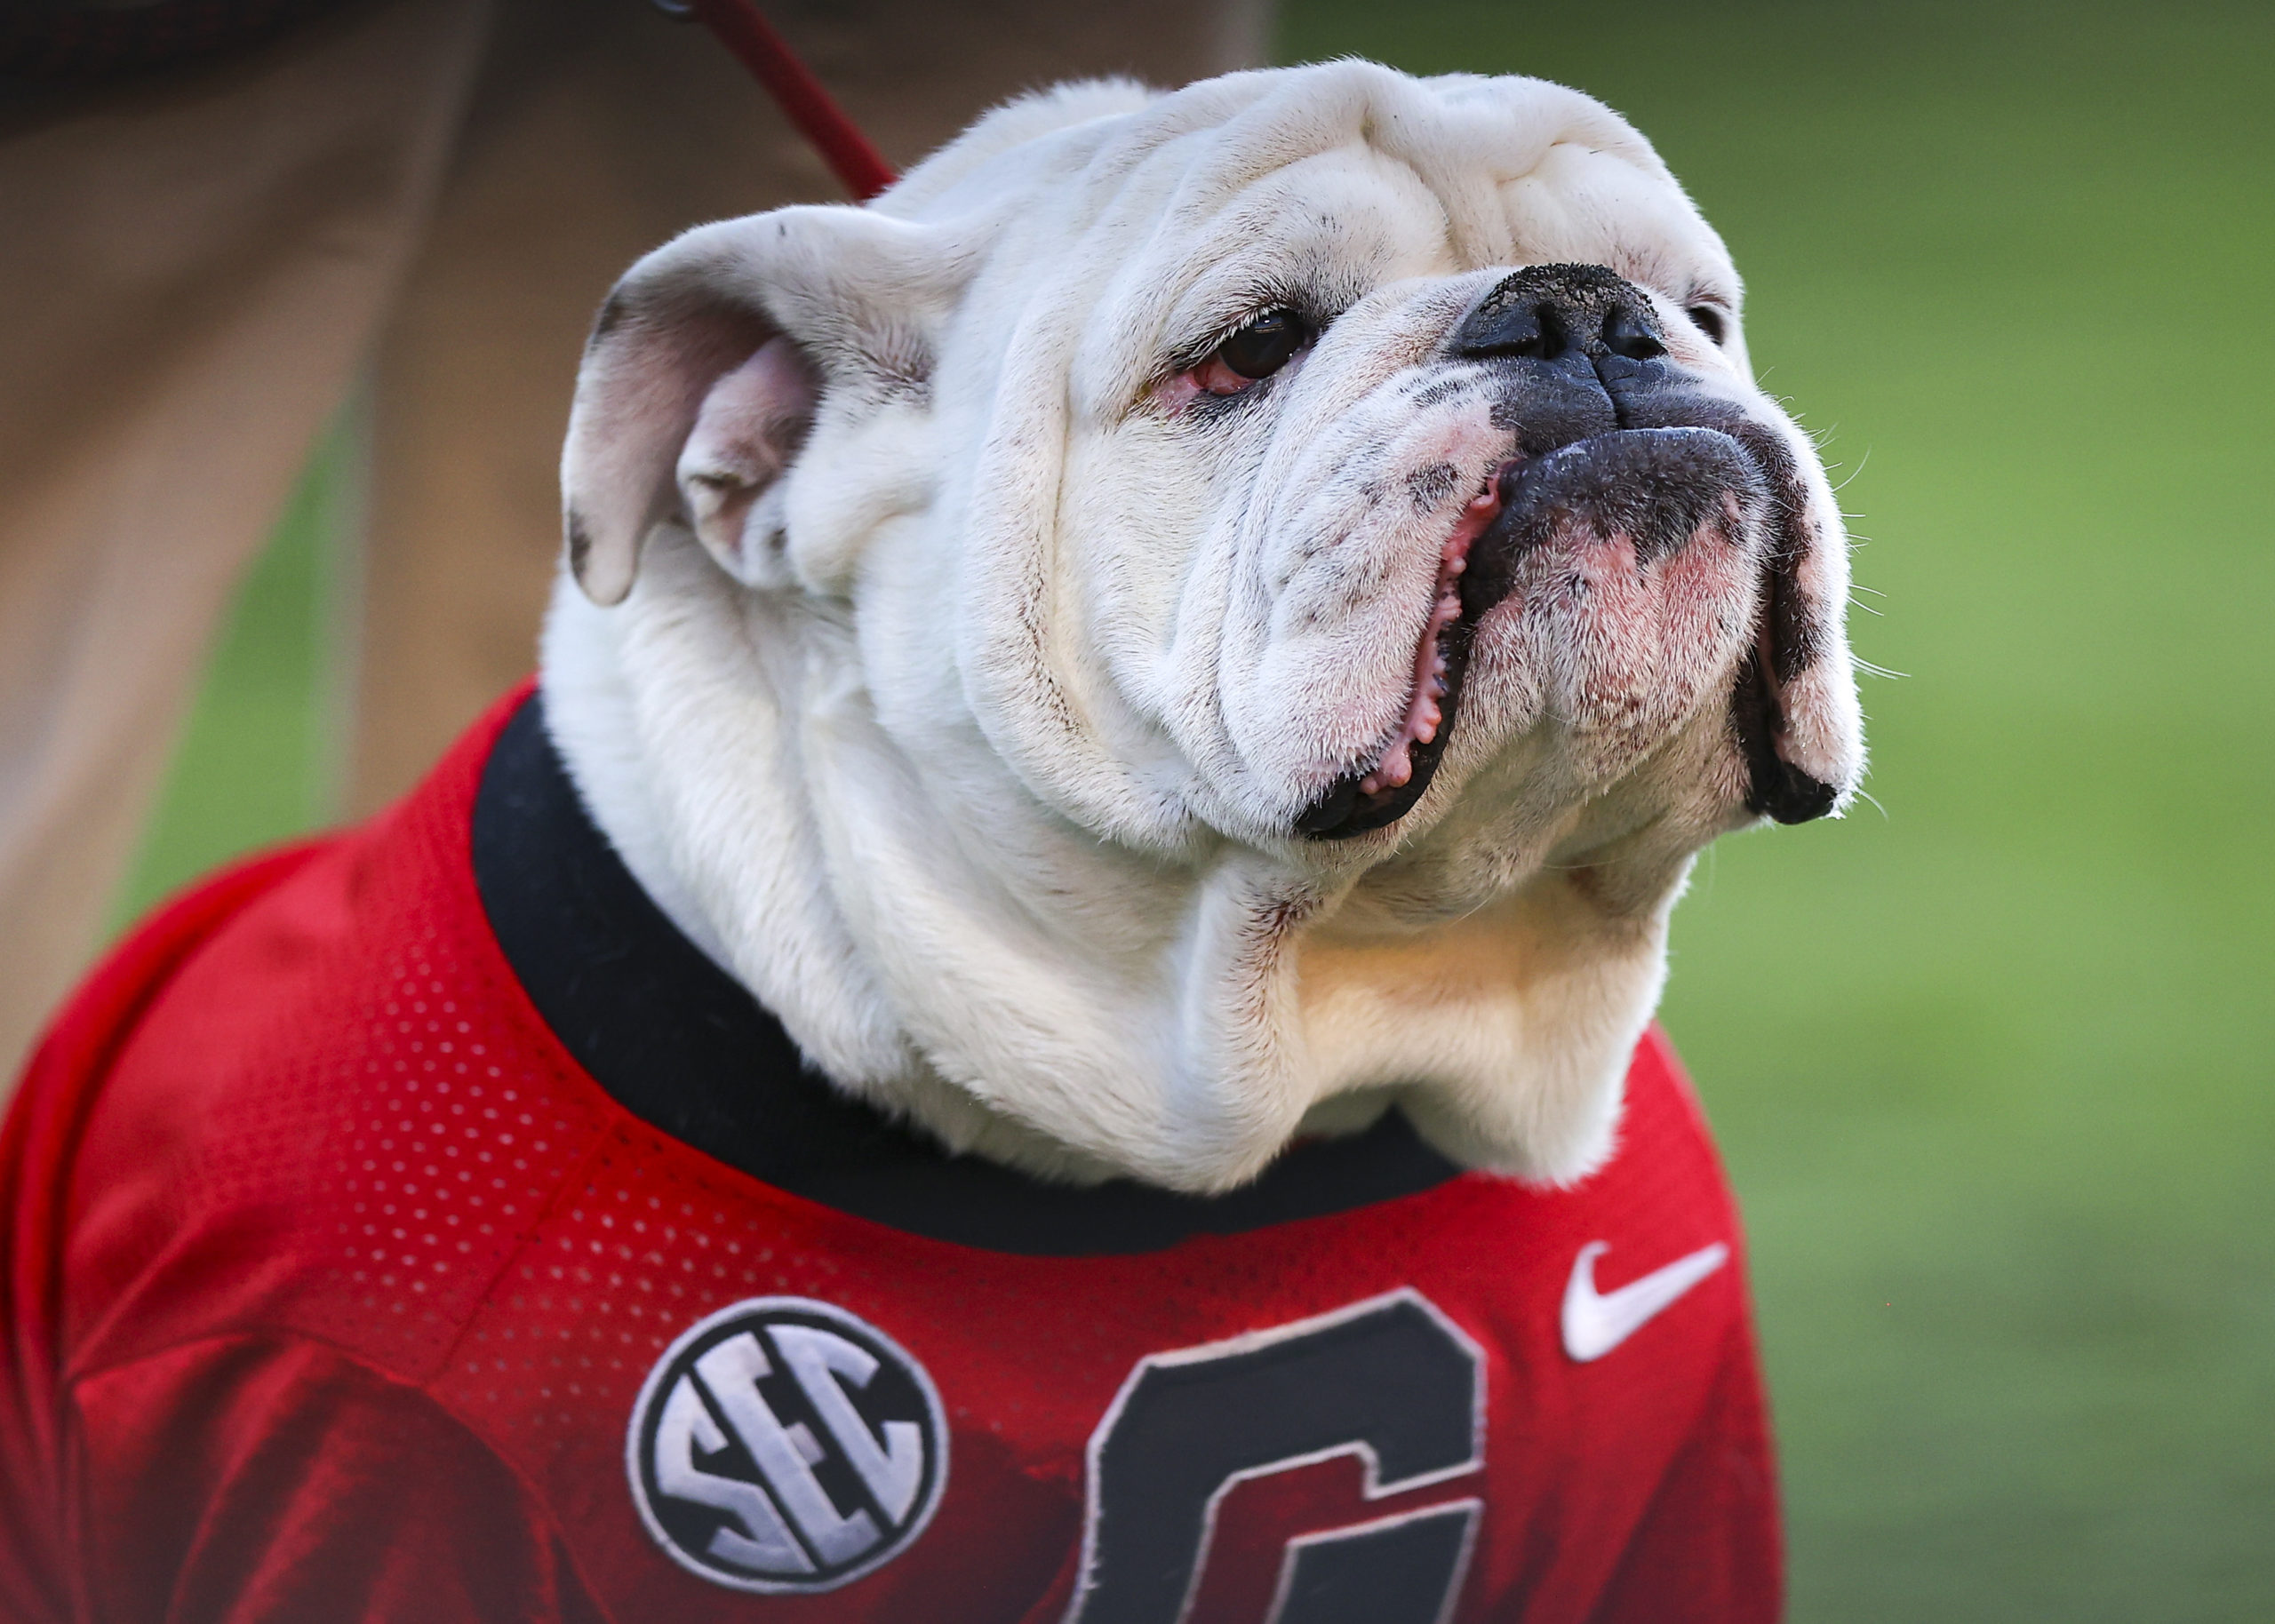 ATHENS, GA - OCTOBER 16: Georgia Bulldogs mascot UGA X is seen on the sidelines in the second half against the Kentucky Wildcats at Sanford Stadium on October 16, 2021 in Athens, Georgia. Todd Kirkland/Getty Images